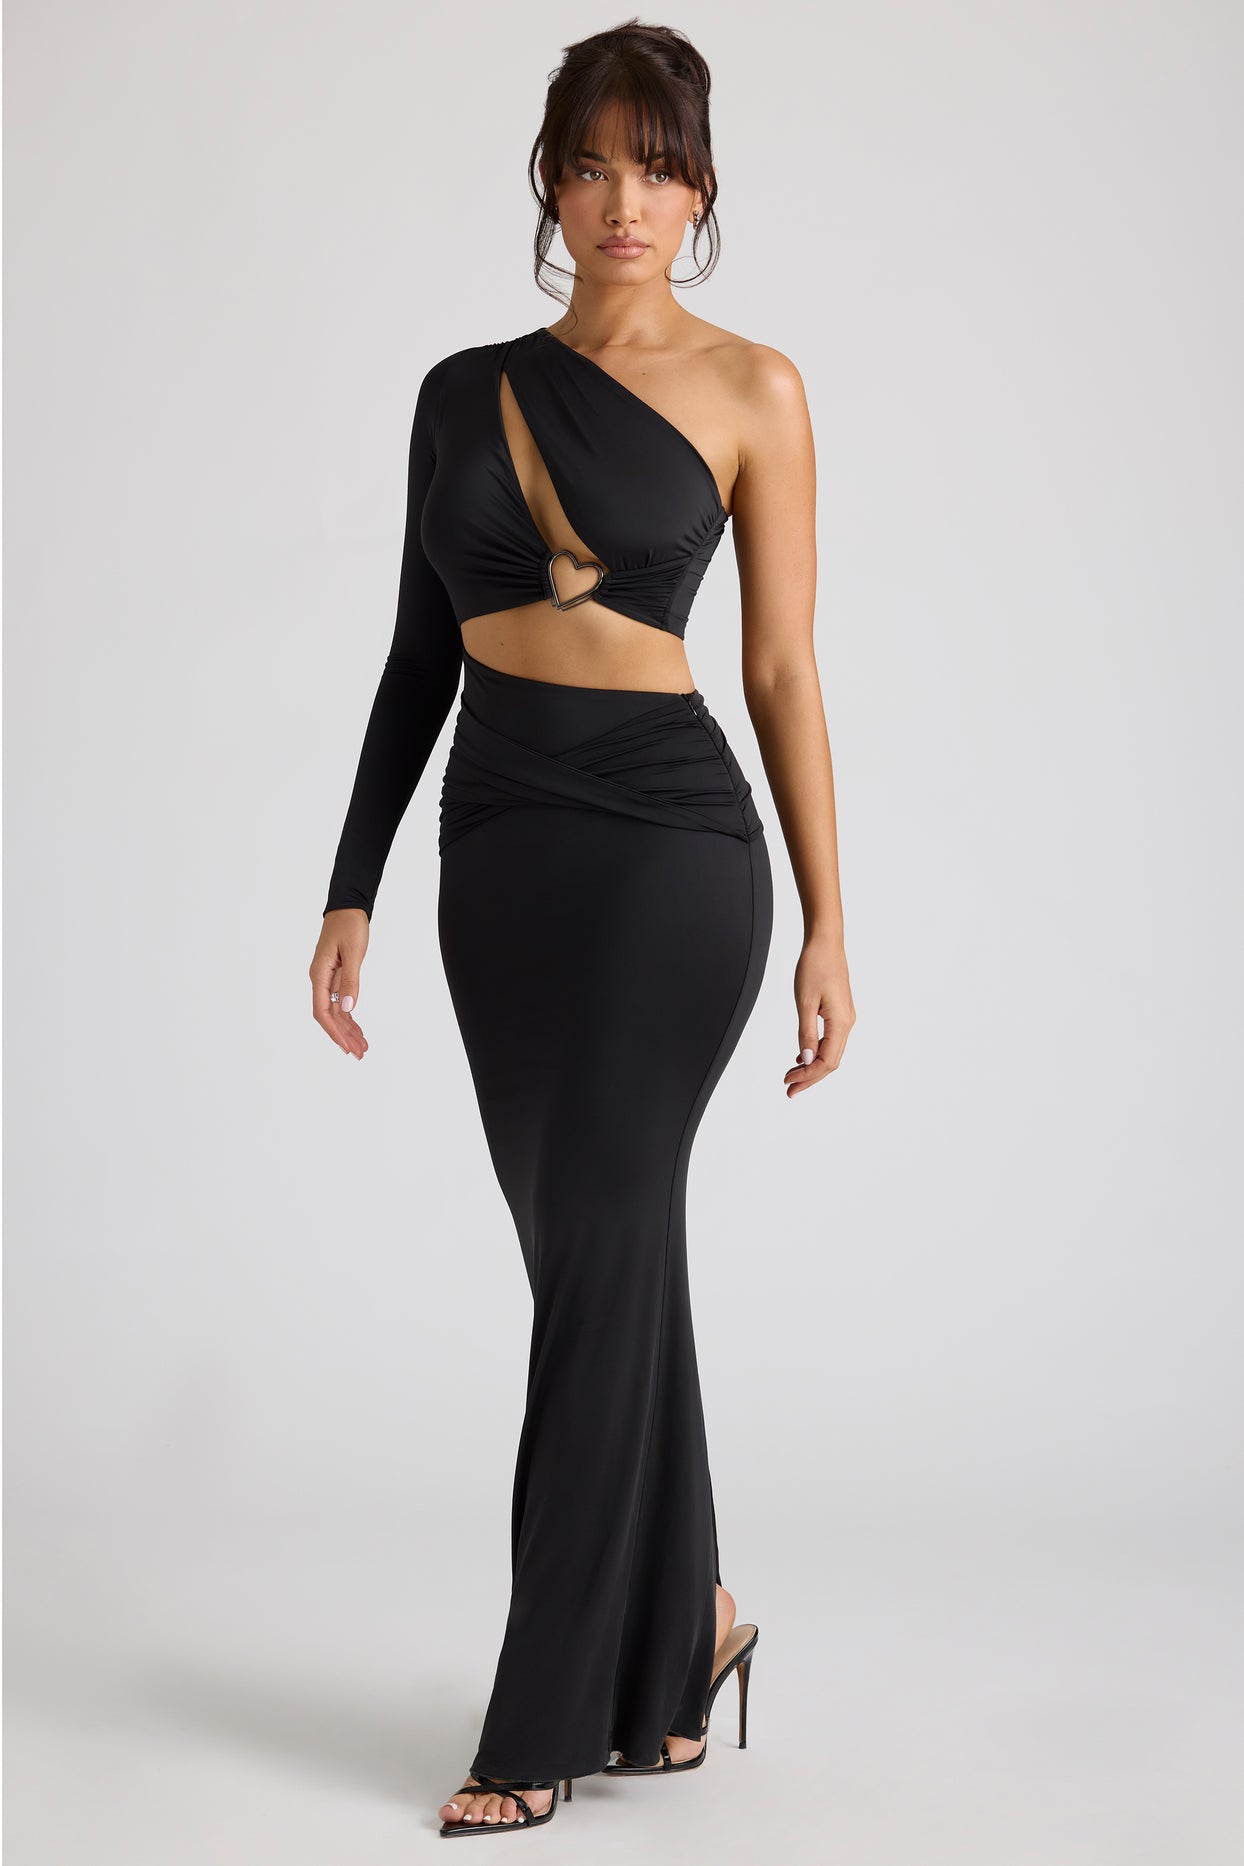 Estela Single Sleeve Cut Out Evening Gown in Black | Oh Polly